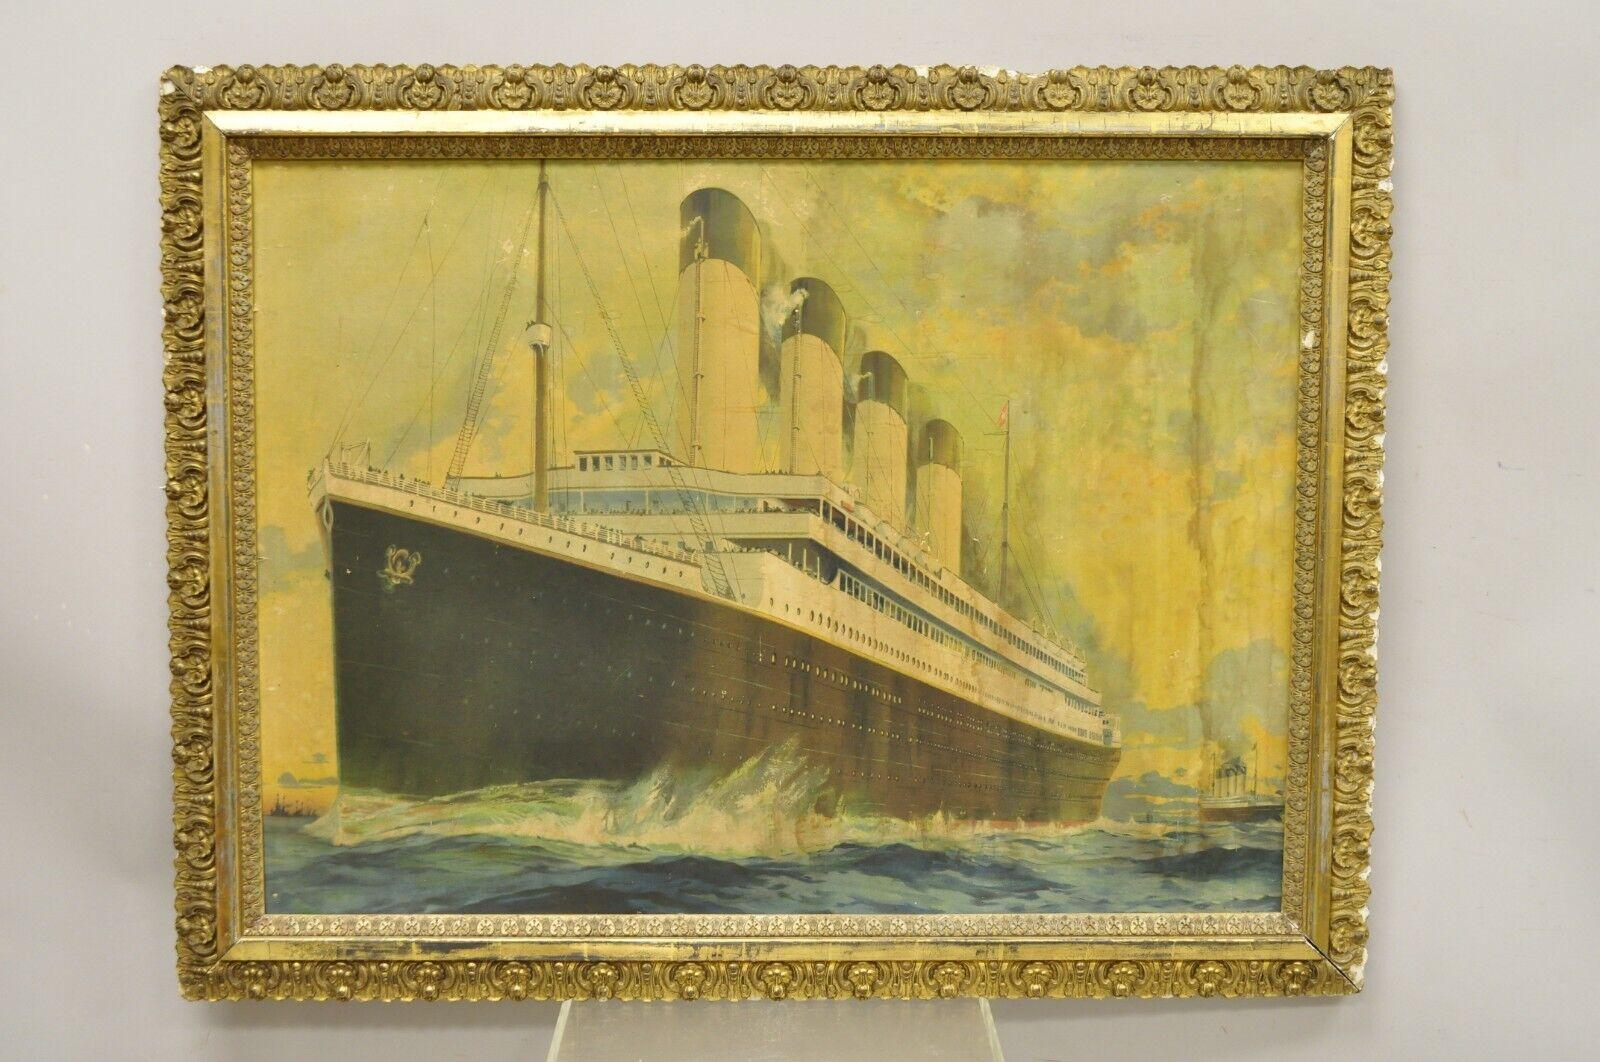 Paper Antique Poster Print Montague Birrell Black White Star Line Olympic and Titanic